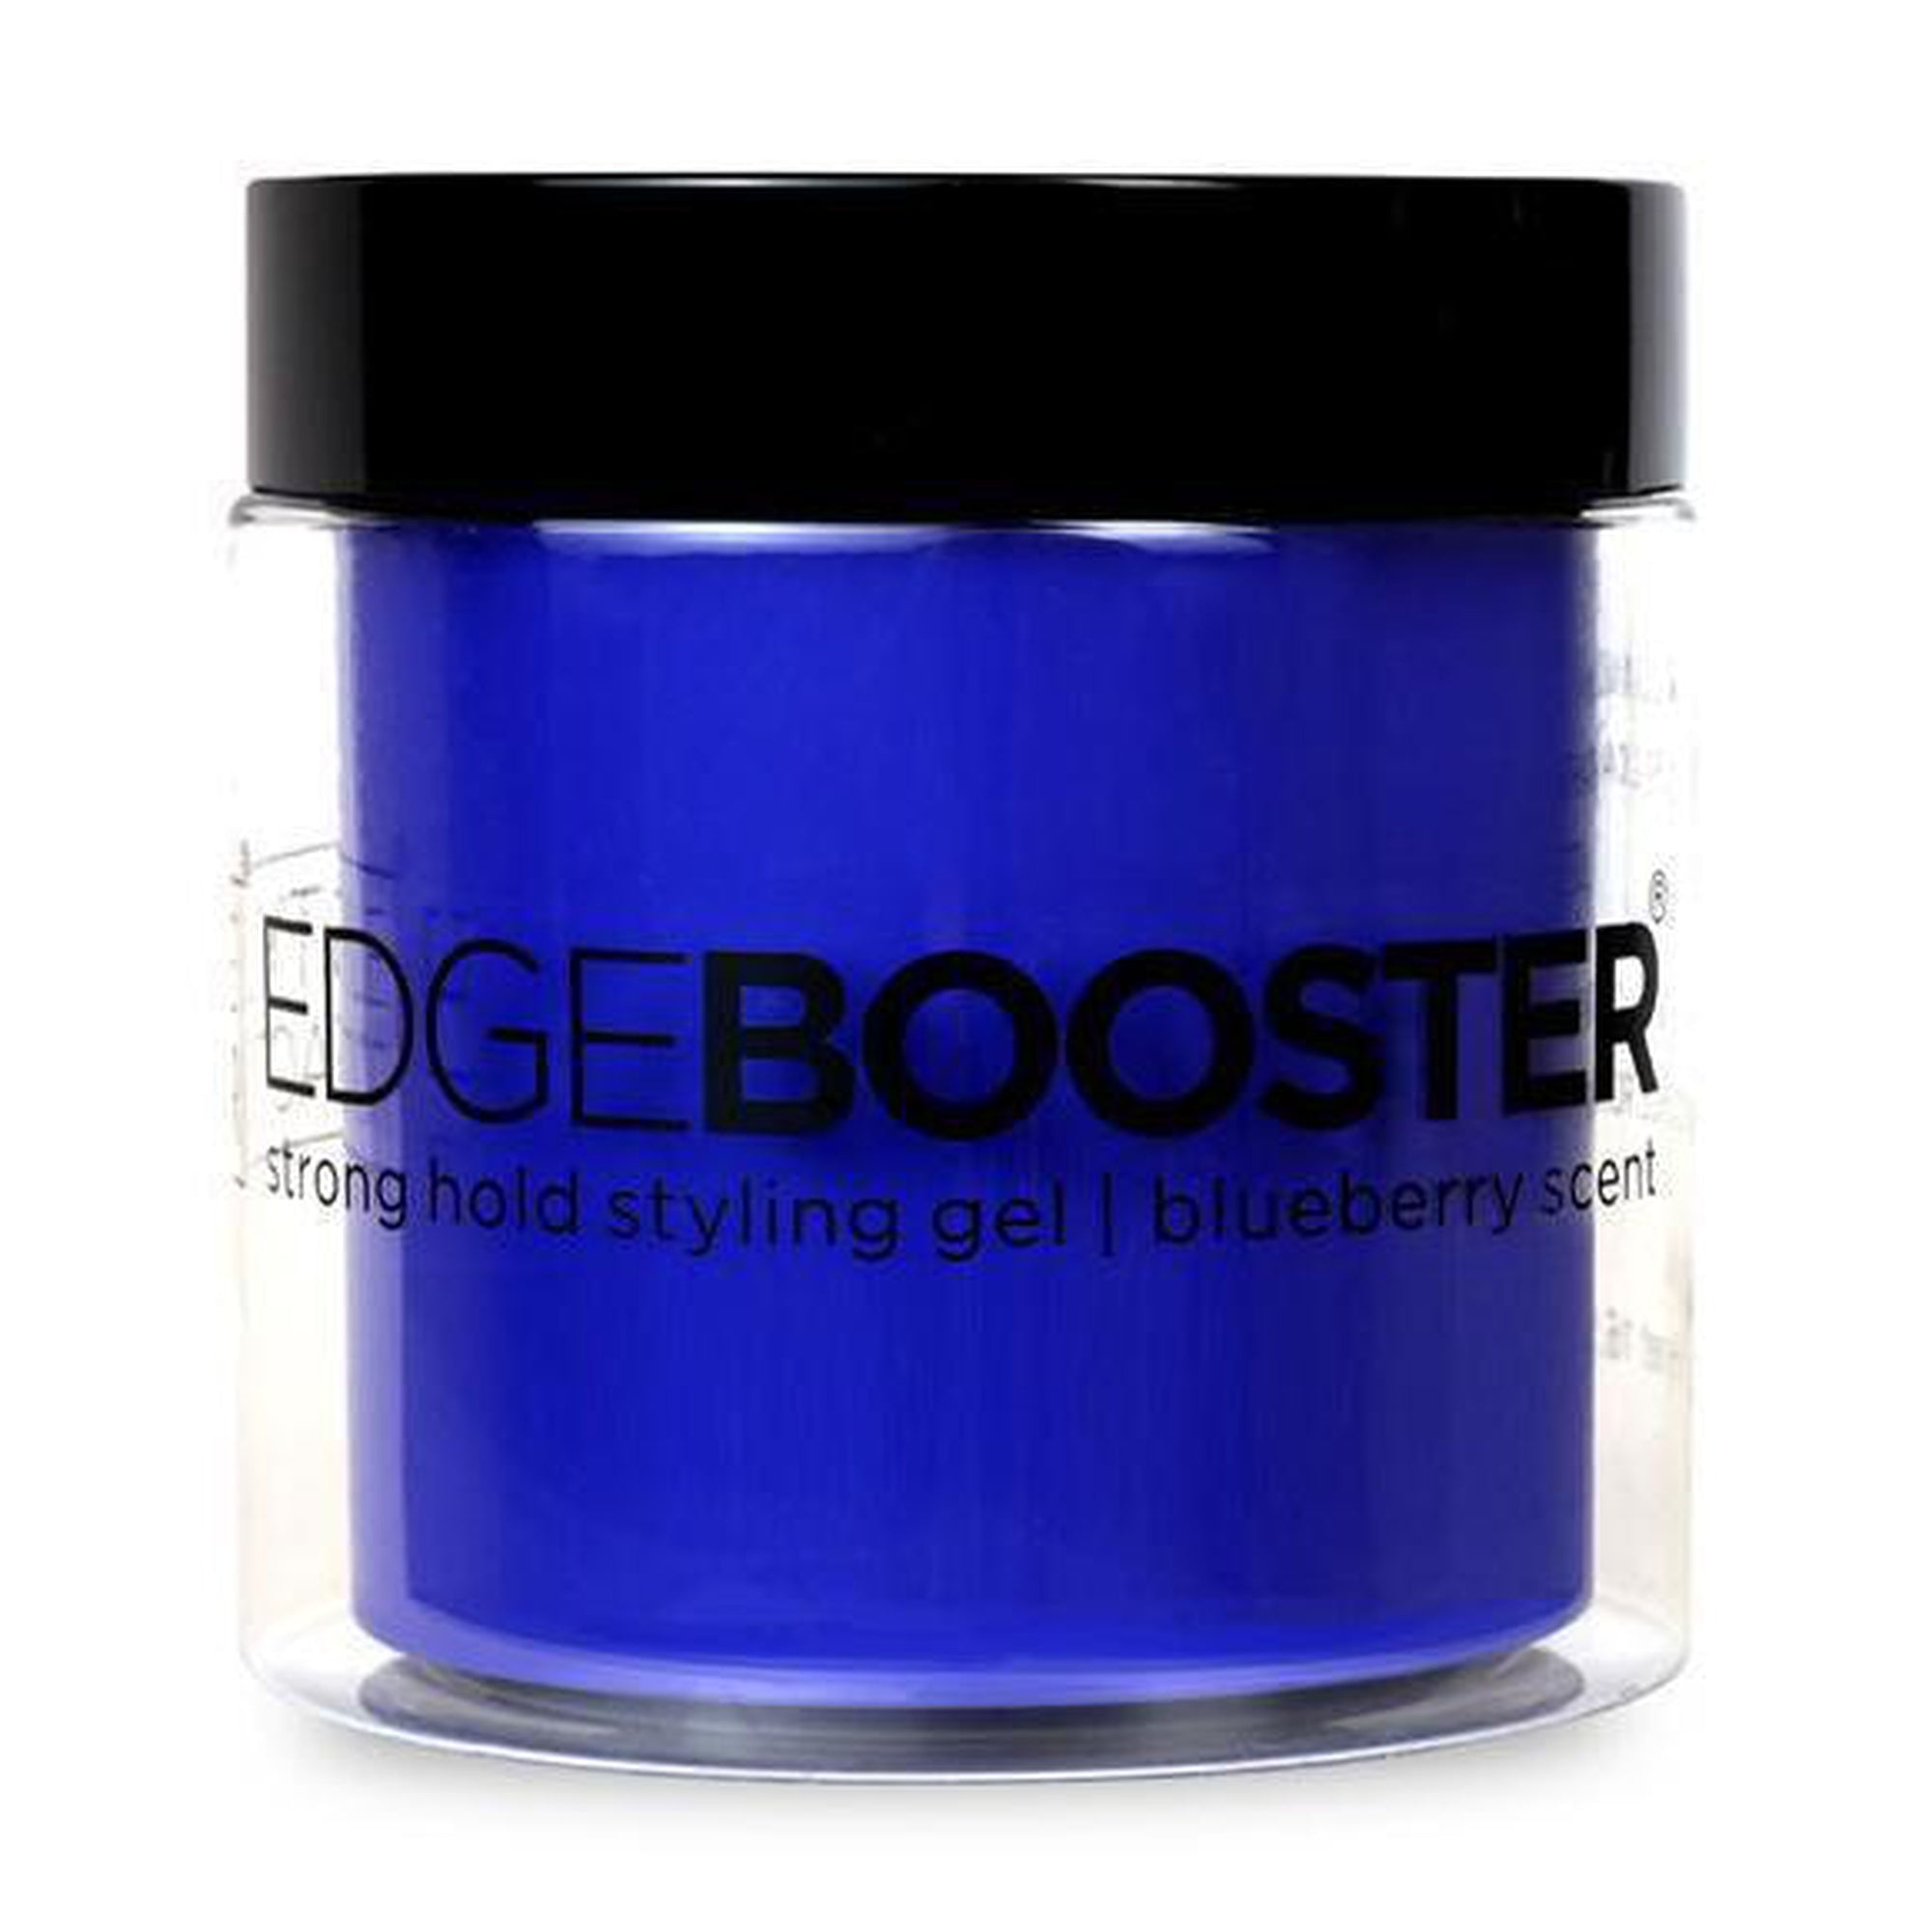 Boost gel. Edge Booster by Style Factor Review. Mission Booster Style.